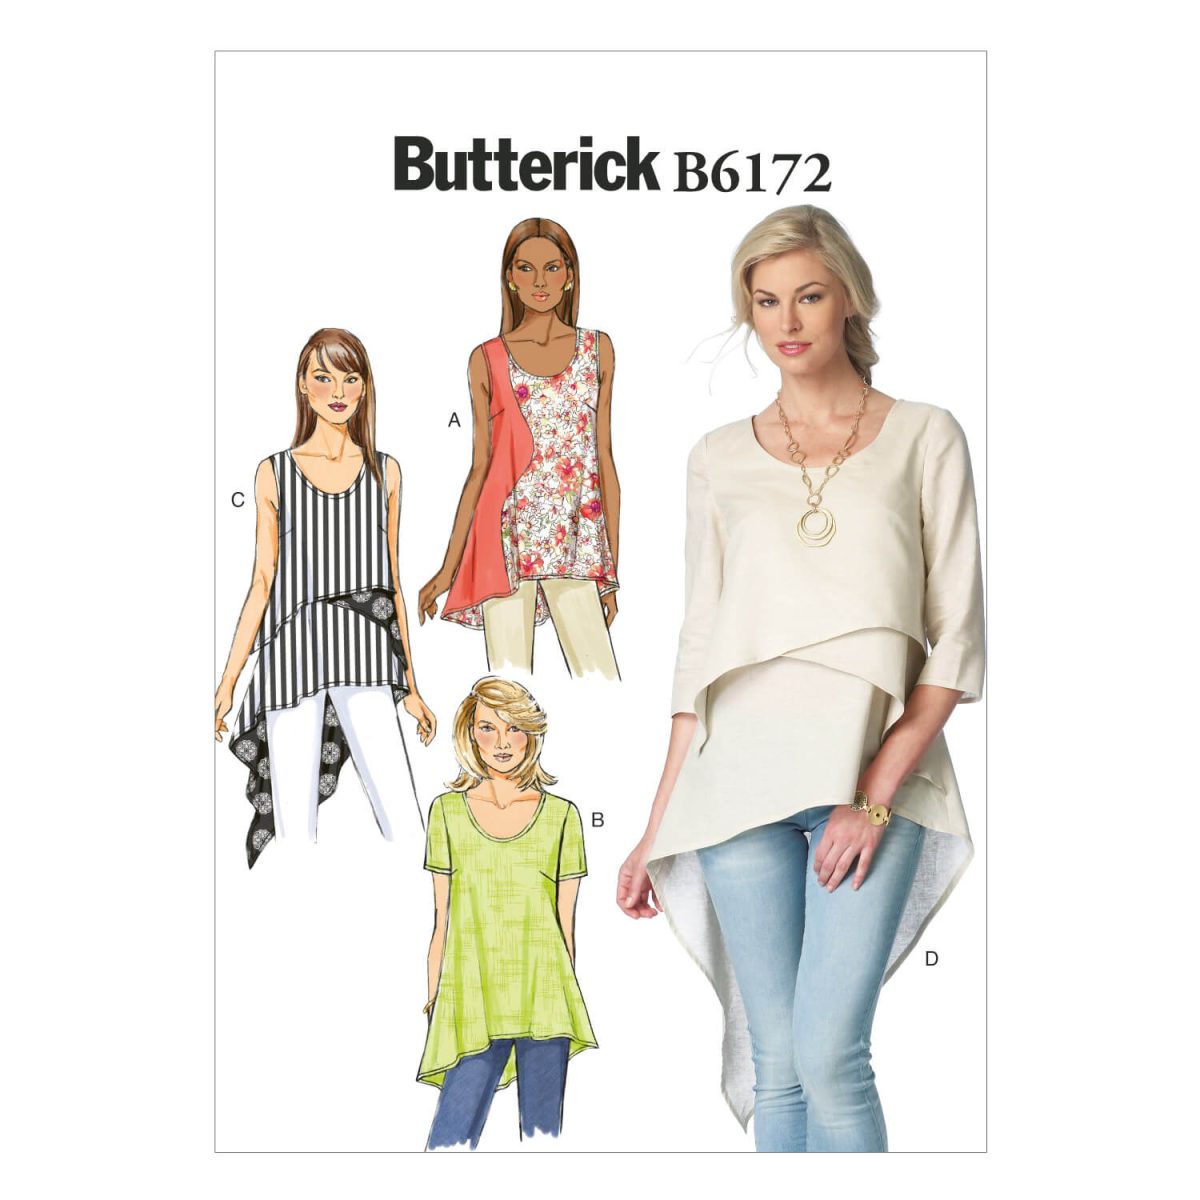 Butterick Sewing Pattern B6172 Misses' Top and Tunic